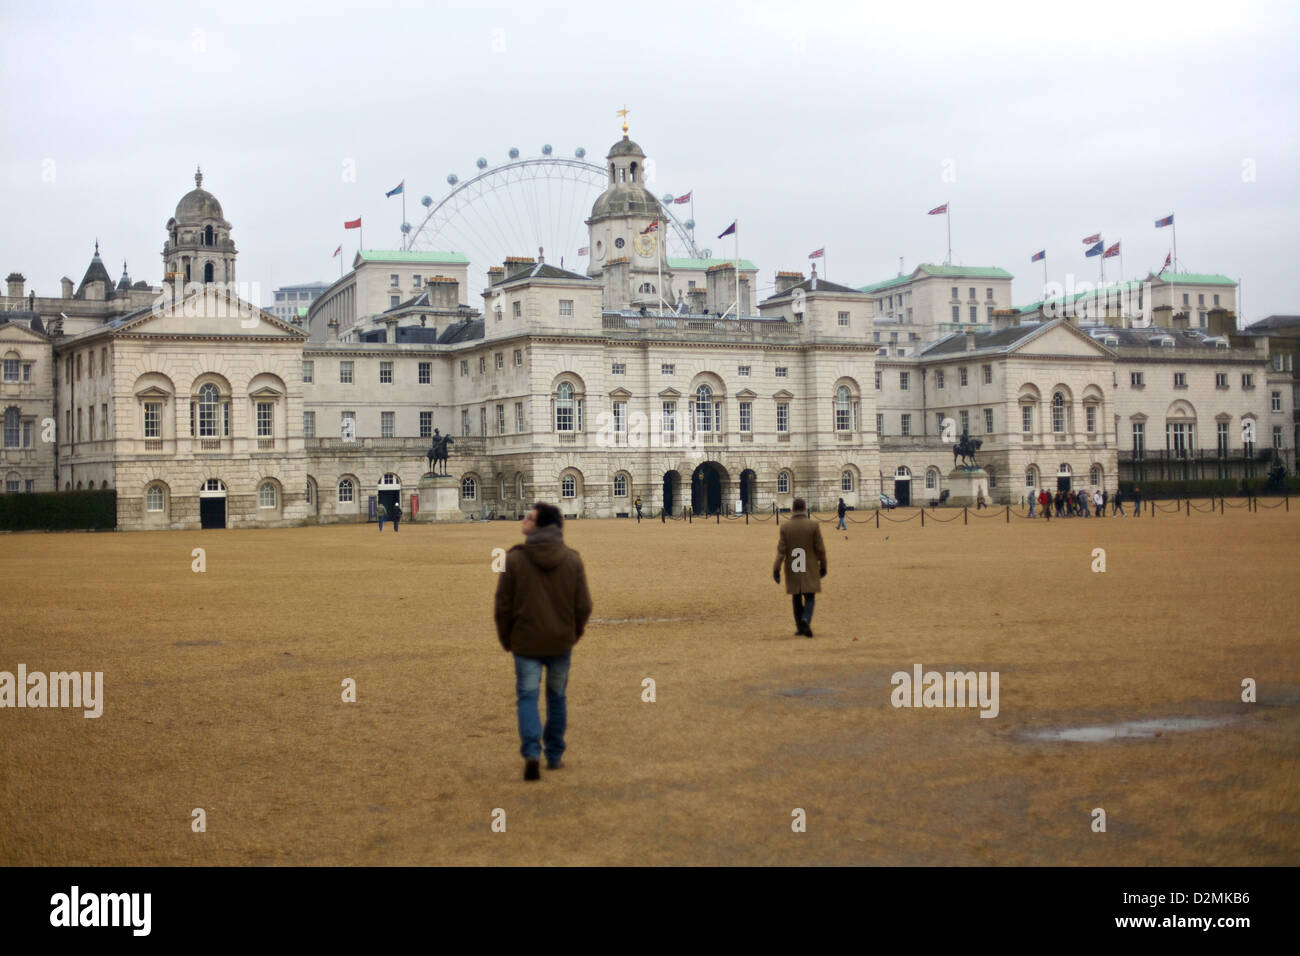 People walk across Horse Guards Parade field in London, England Stock Photo